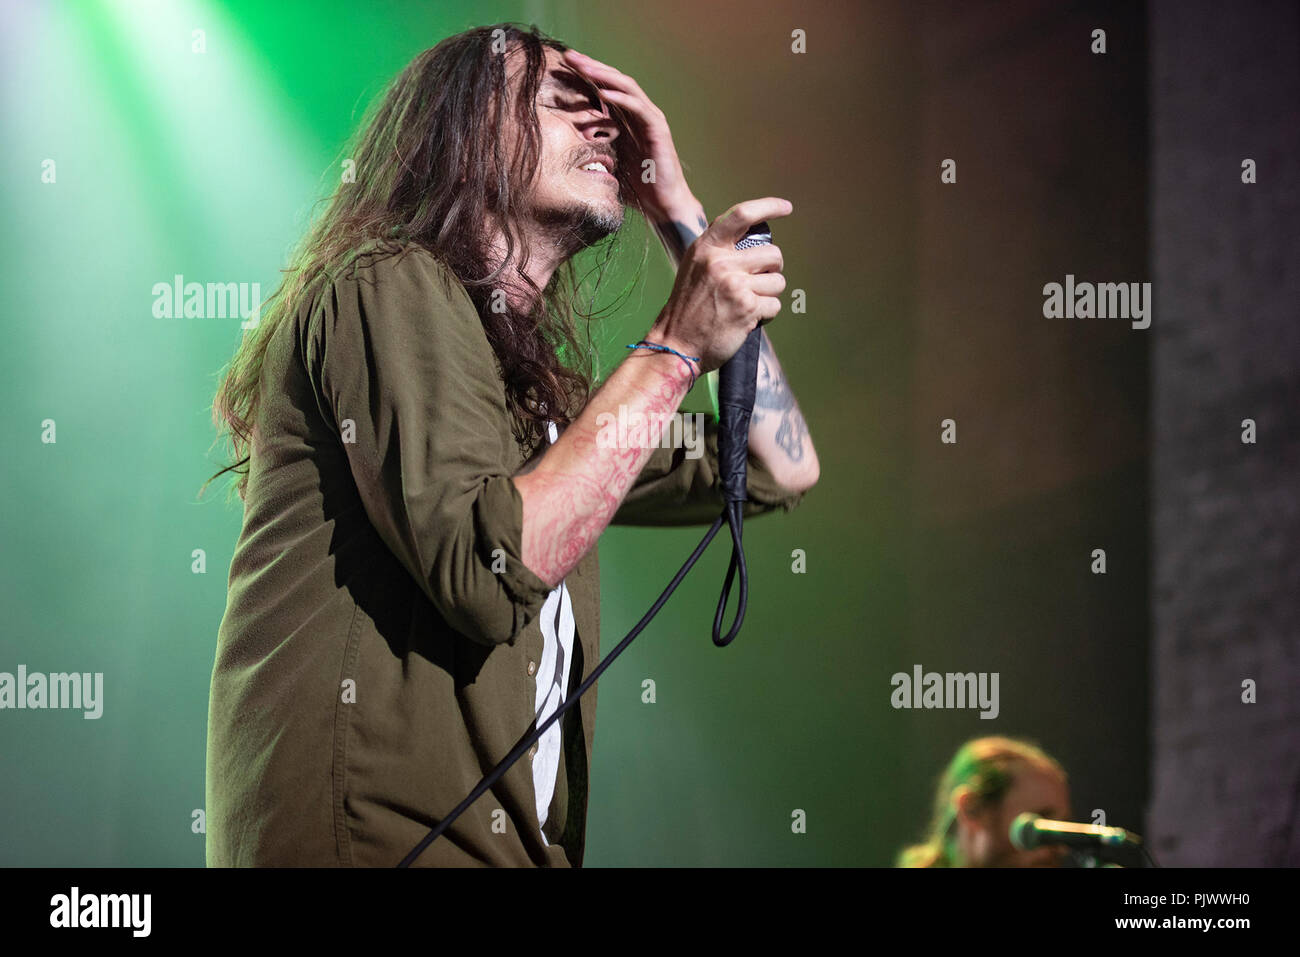 Manchester, UK. 8th September 2018.Brandon Boyd, Mike Einziger, Jose Pasillas, Chris Kilmore and Ben Kenney of Incubus perform at the O2 Apollo in Manchester 08/09/2018 Credit: Gary Mather/Alamy Live News Stock Photo